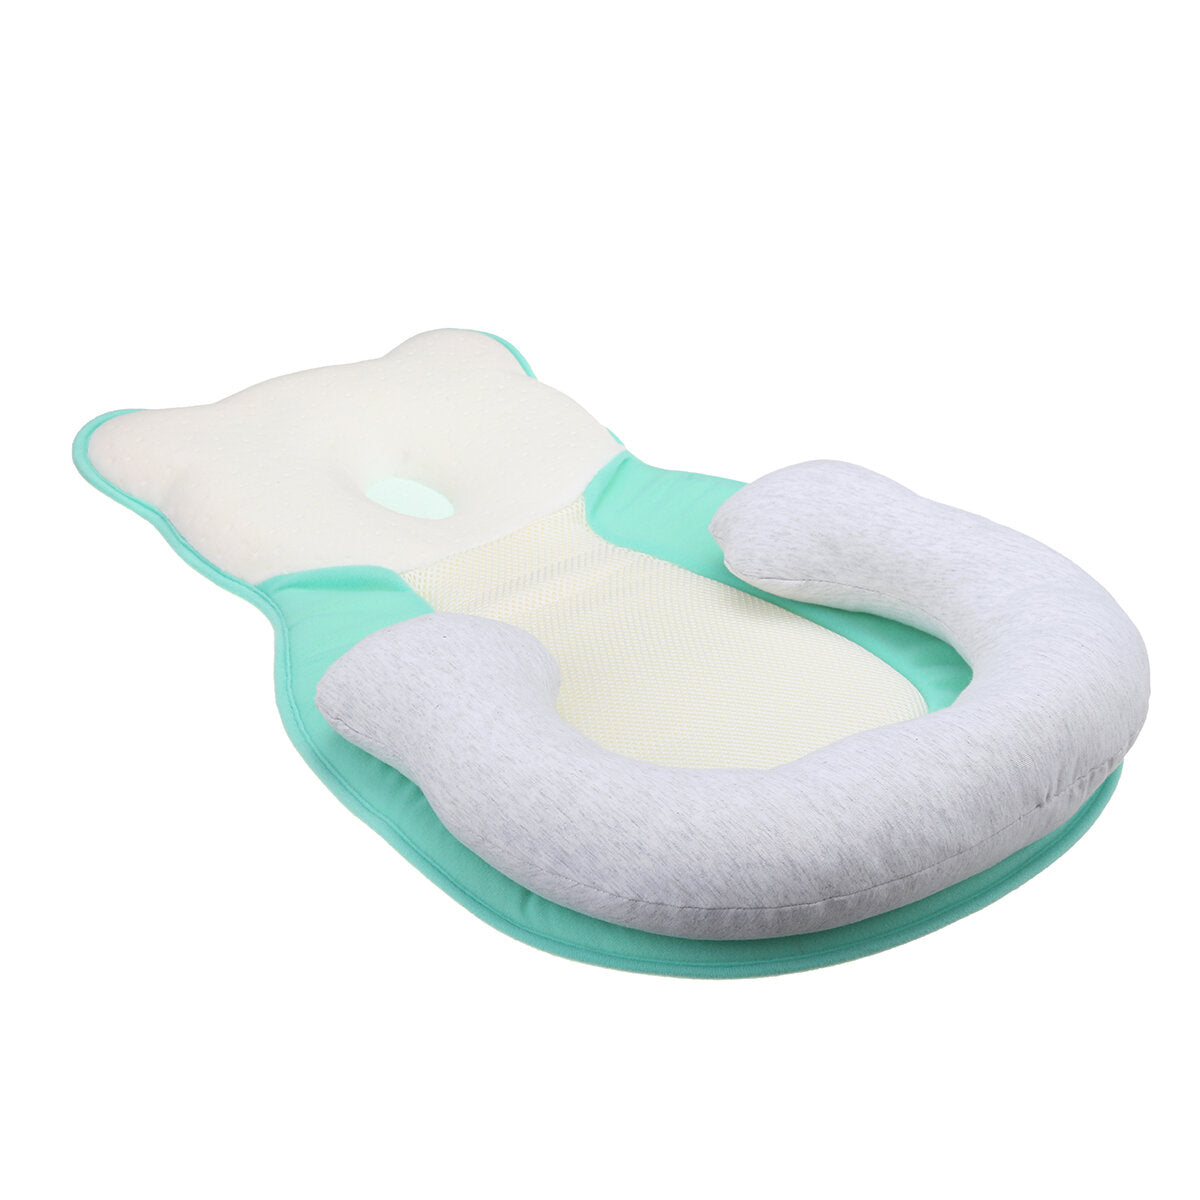 Breathable Newborn Baby Infant Pillow Sleep Mat Anti Flat Head For Crib Bed Neck-Suppor